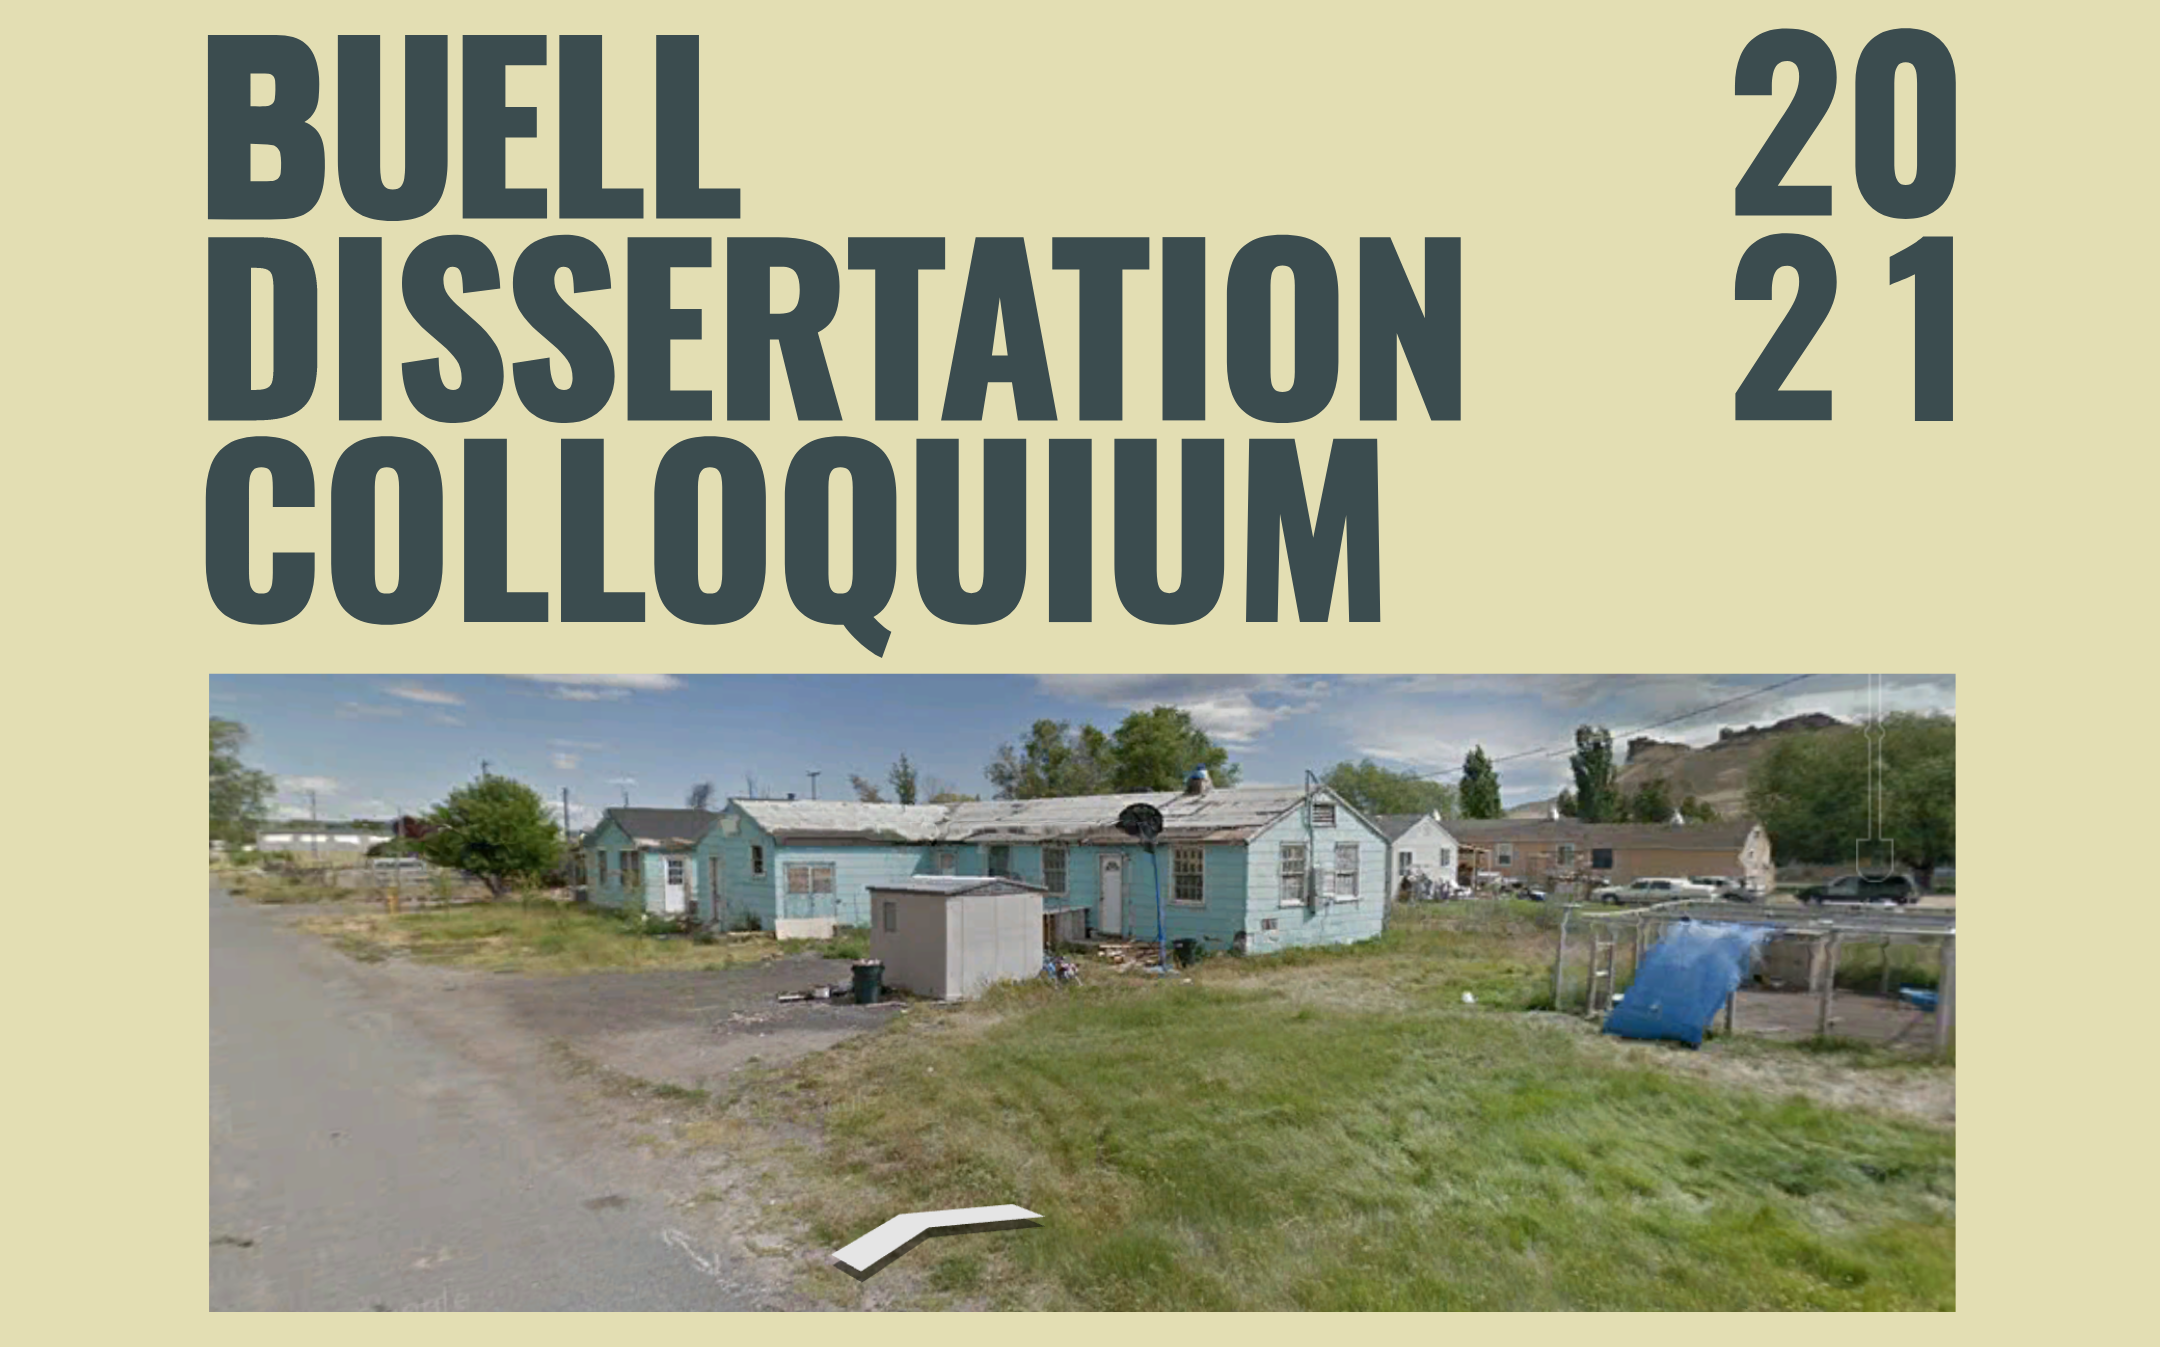 A google street view image of a small blue house with the google arrow at the bottom. Above the image, in bold text, reads "Buell Dissertation Colloquium" and "2021" 